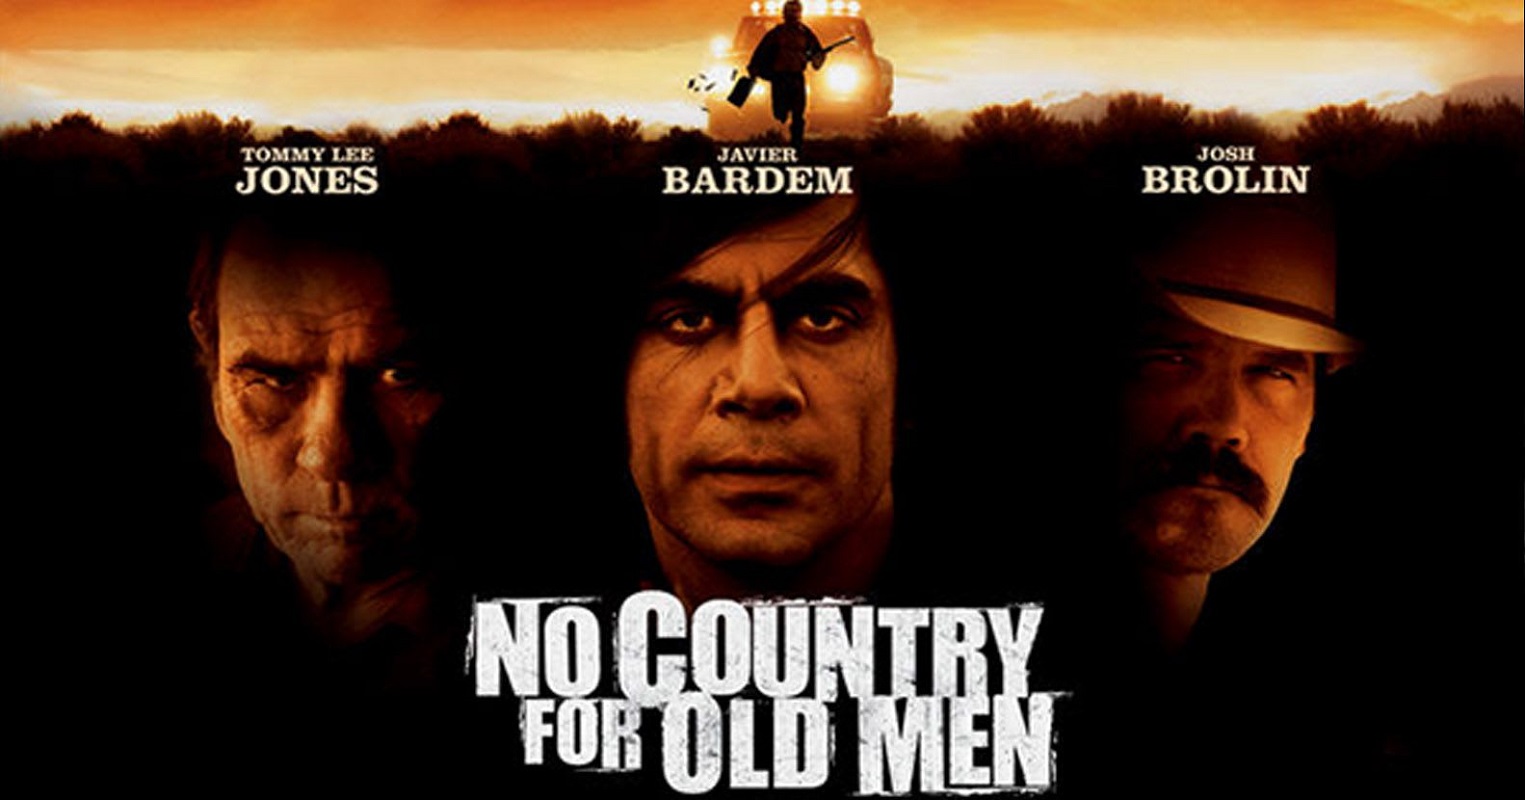 Име:  no country for old men.jpg
Разглеждания: 96
Размер:  169,6 КБ